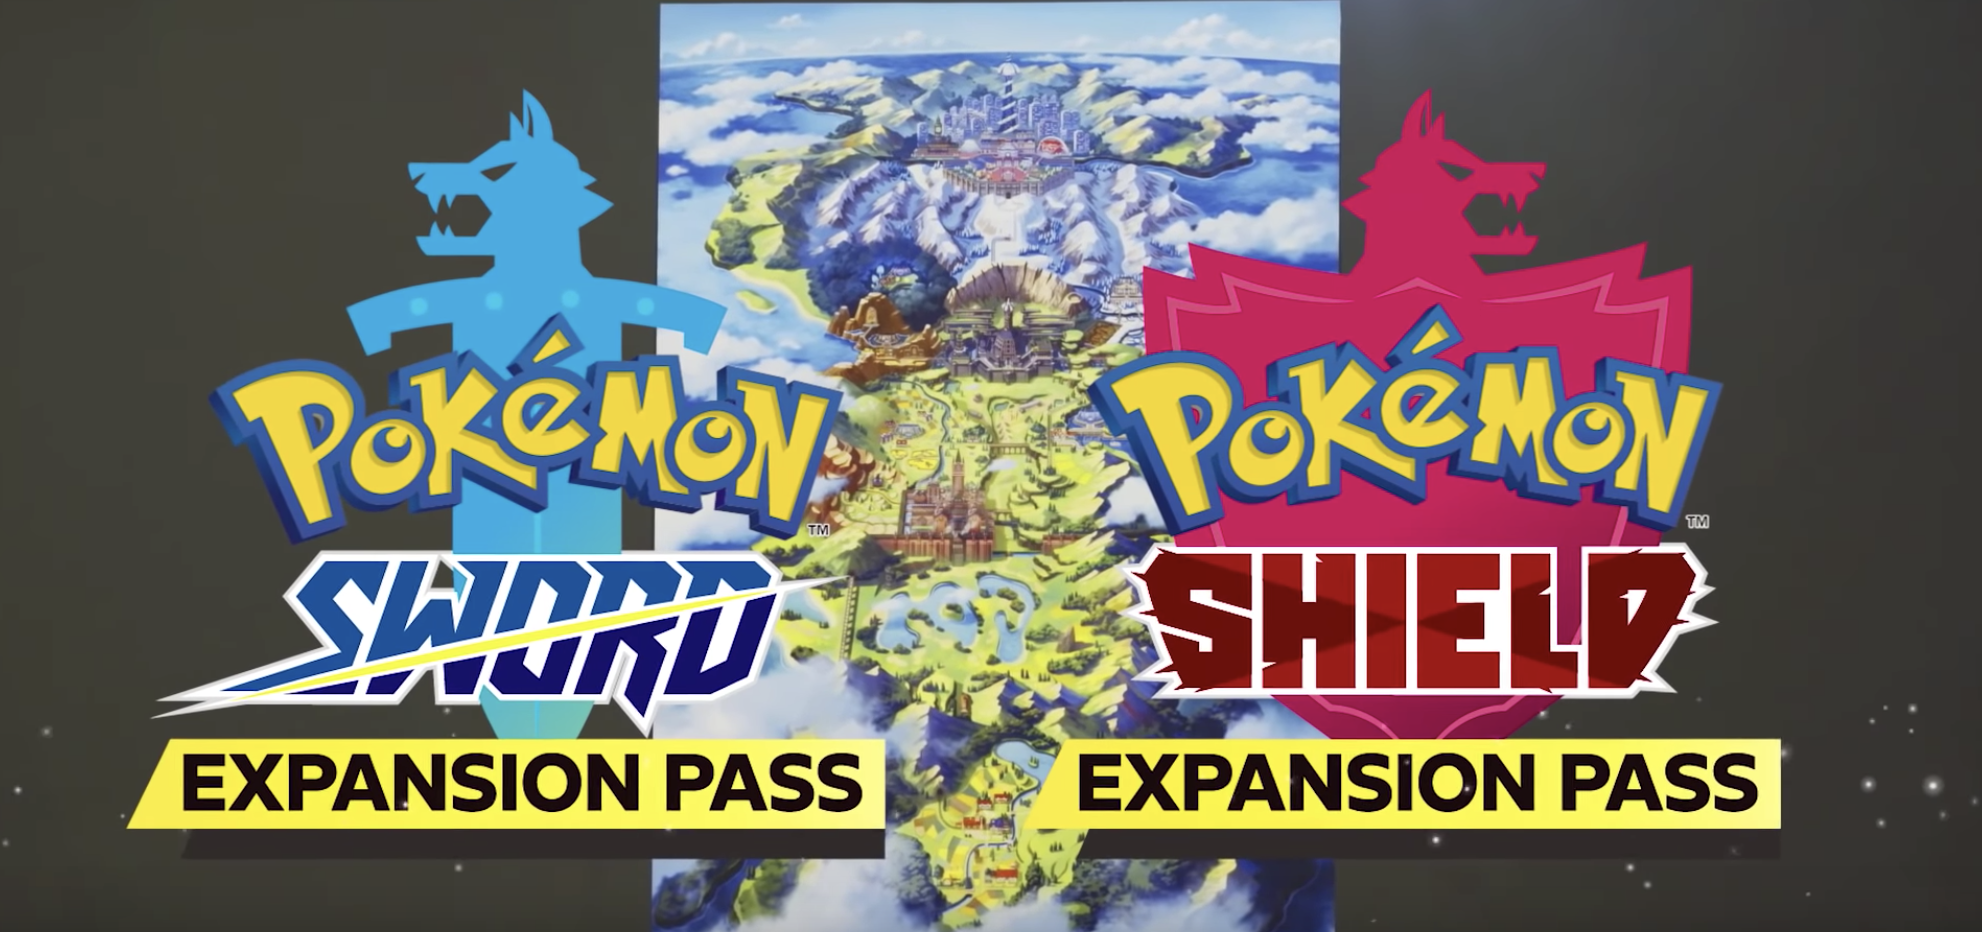 Pokemon Sword And Shield Are Getting Downloadable Expansions This